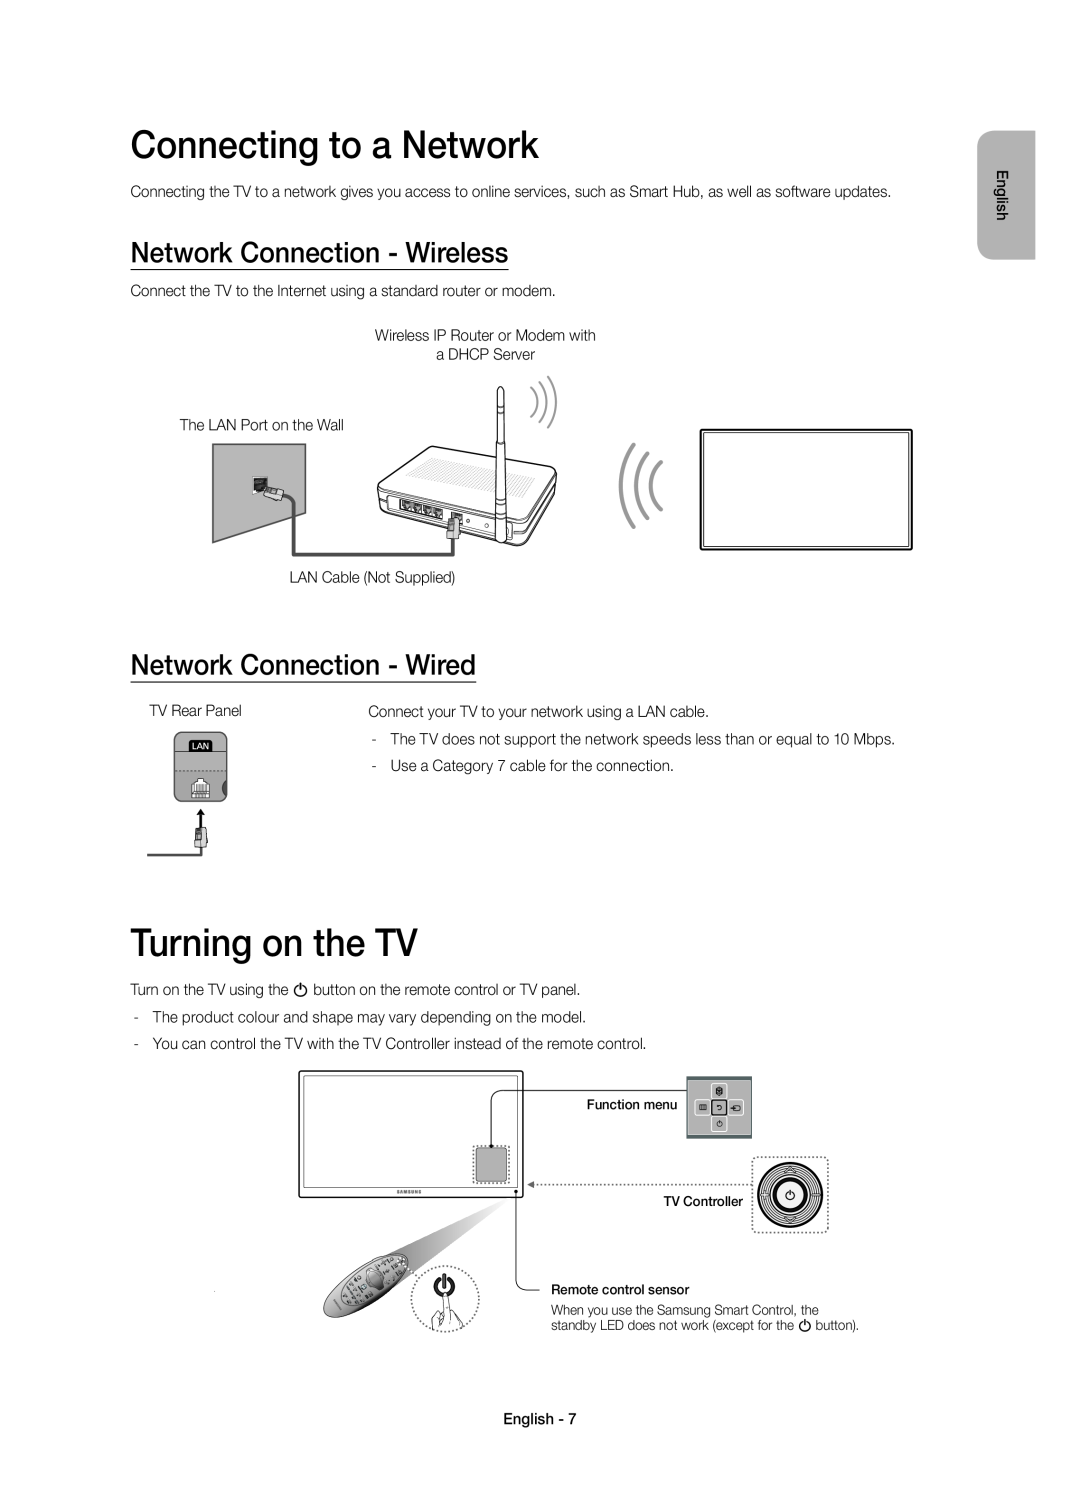 Samsung UE48H6400AWXXC, UE48H6400AWXXH manual Connecting to a Network, Turning on the TV, Network Connection - Wireless 